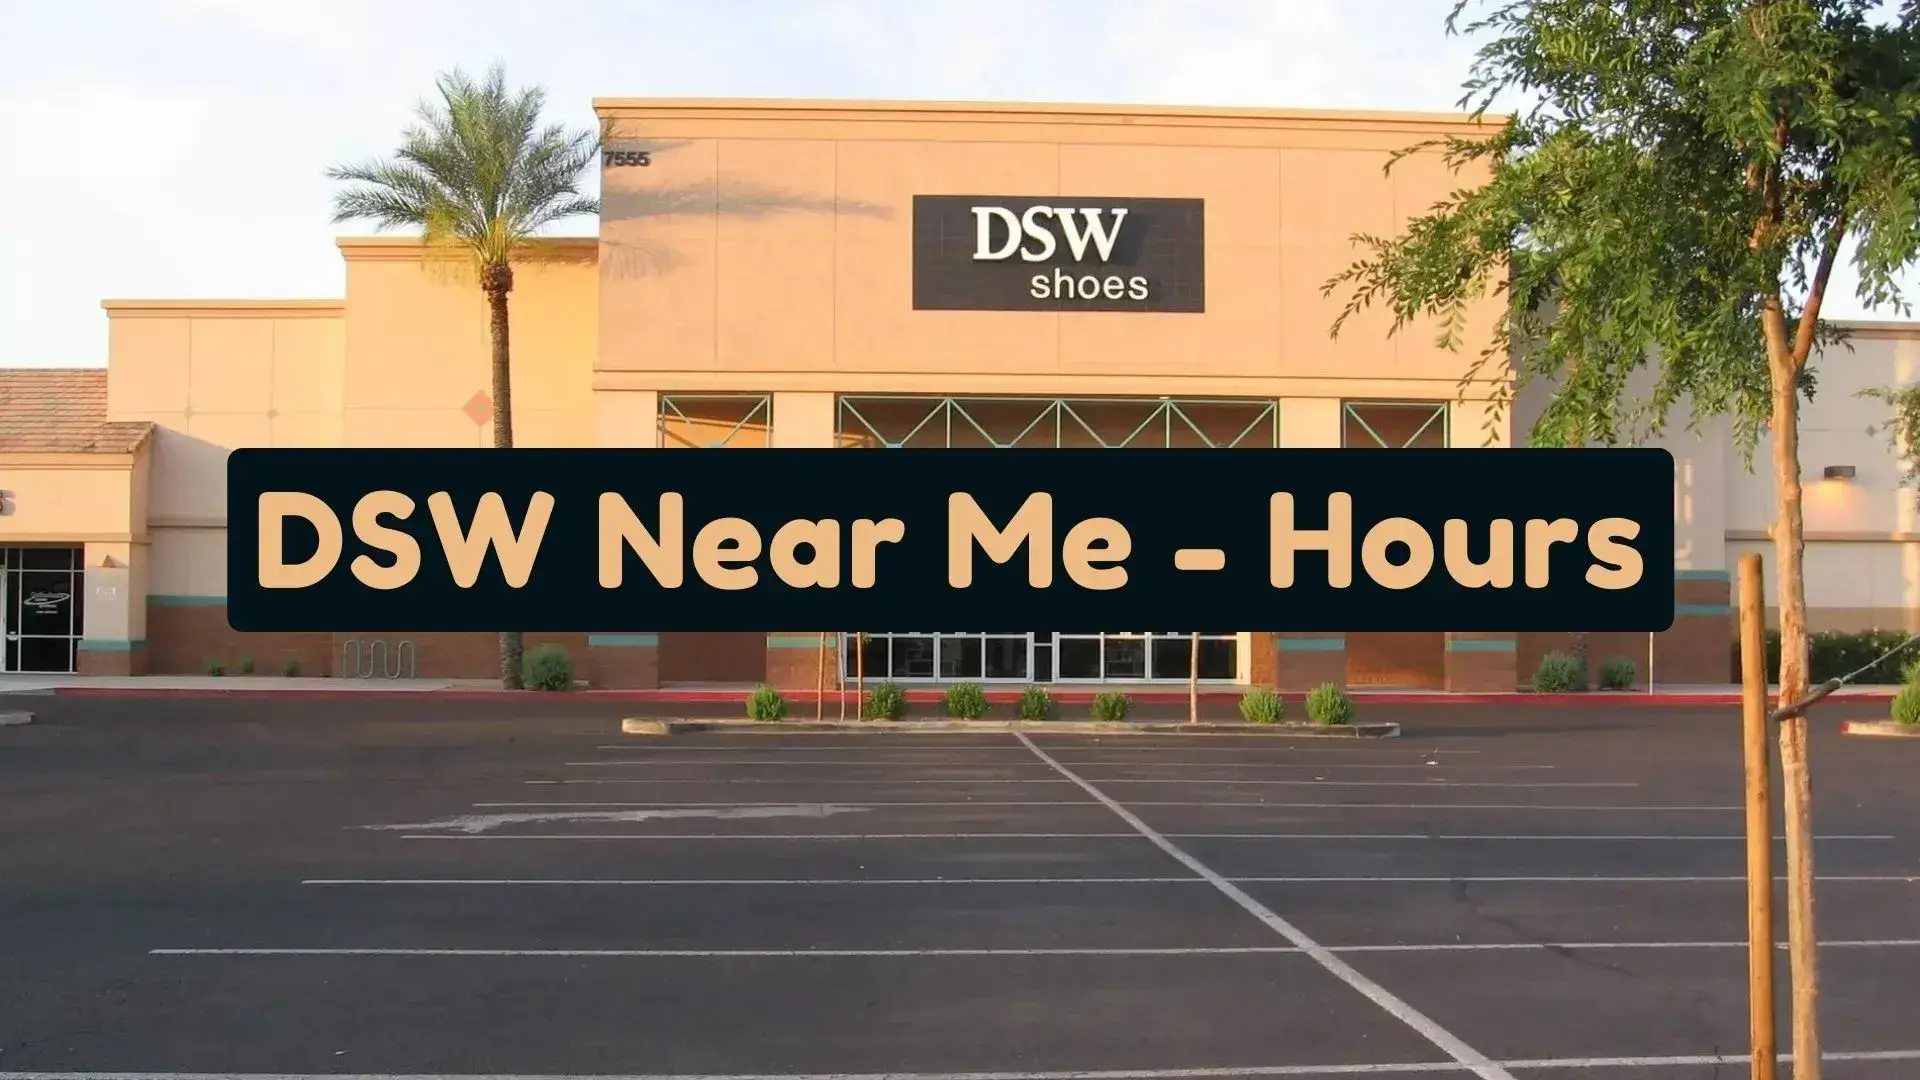 Are You Looking For Nearby DSW Near Me Locations | Then Read This Ultimate Guide To Find DSW Hours, Locations, Reviews & Ratings.